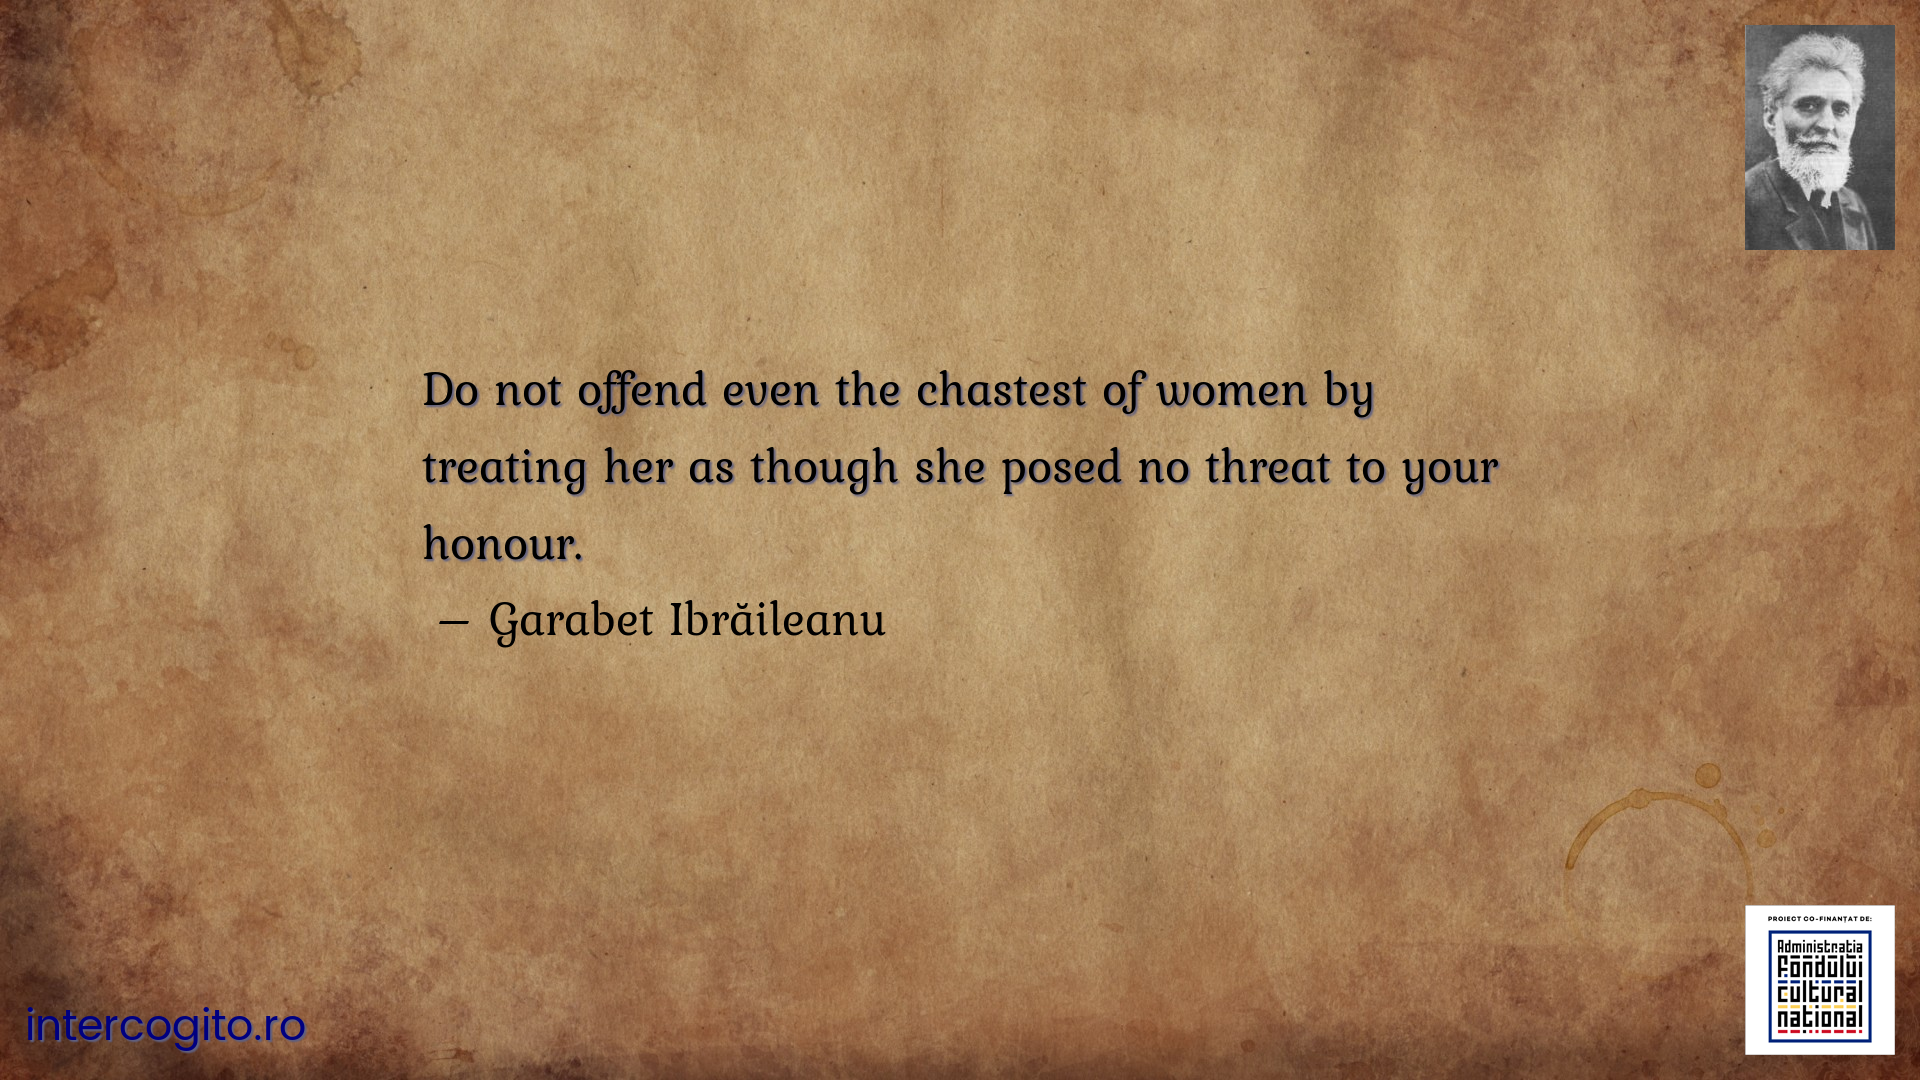 Do not offend even the chastest of women by treating her as though she posed no threat to your honour.